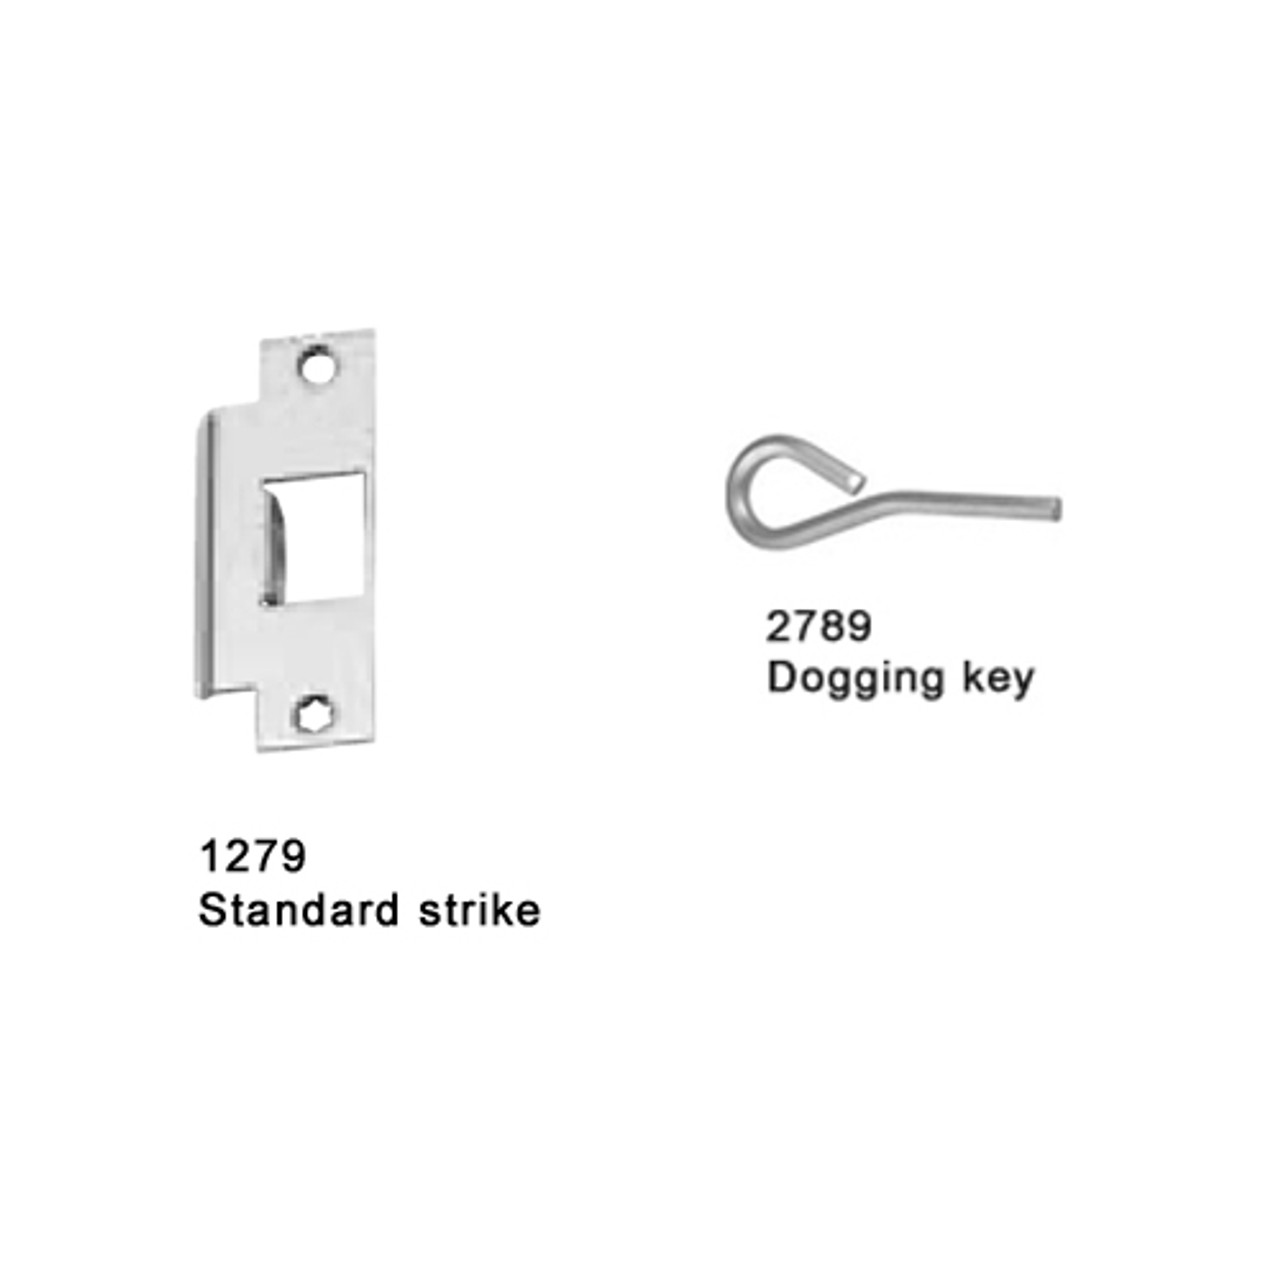 25-M-L-DANE-US26-4-RHR Falcon 25 Series Mortise Lock Devices with 510L Dane Lever Trim in Polished Chrome